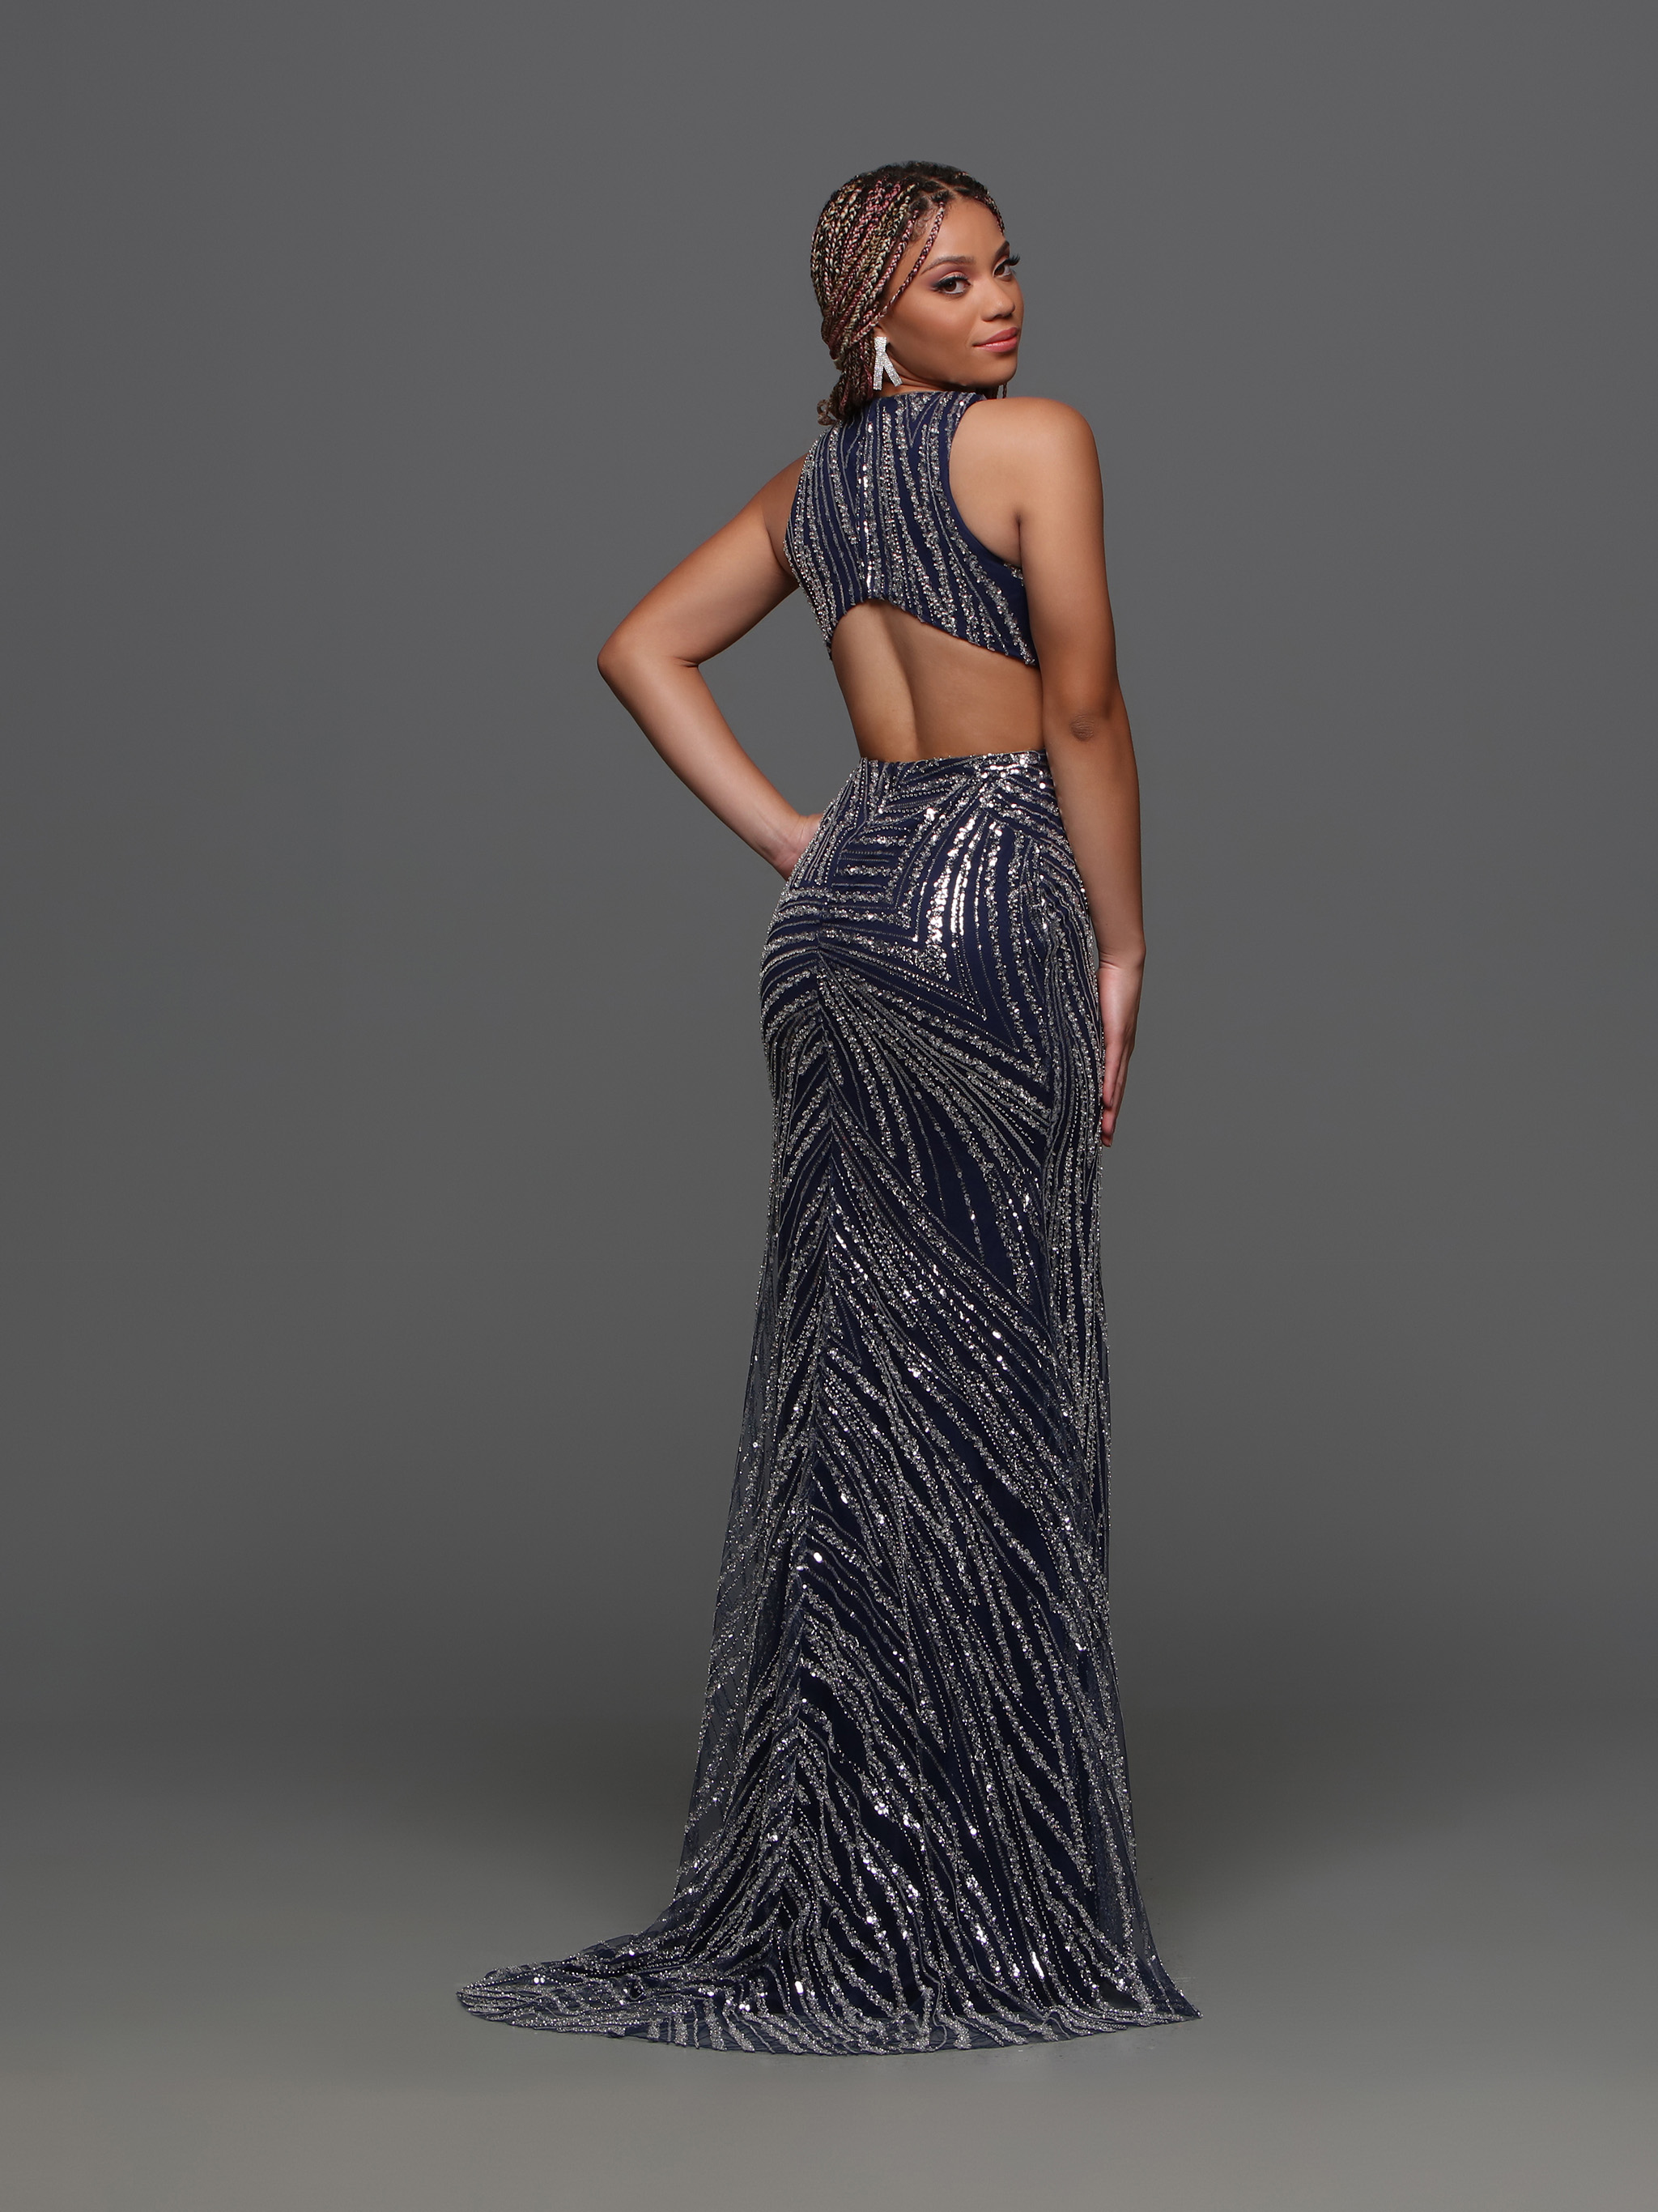 Image showing back view of style #72333